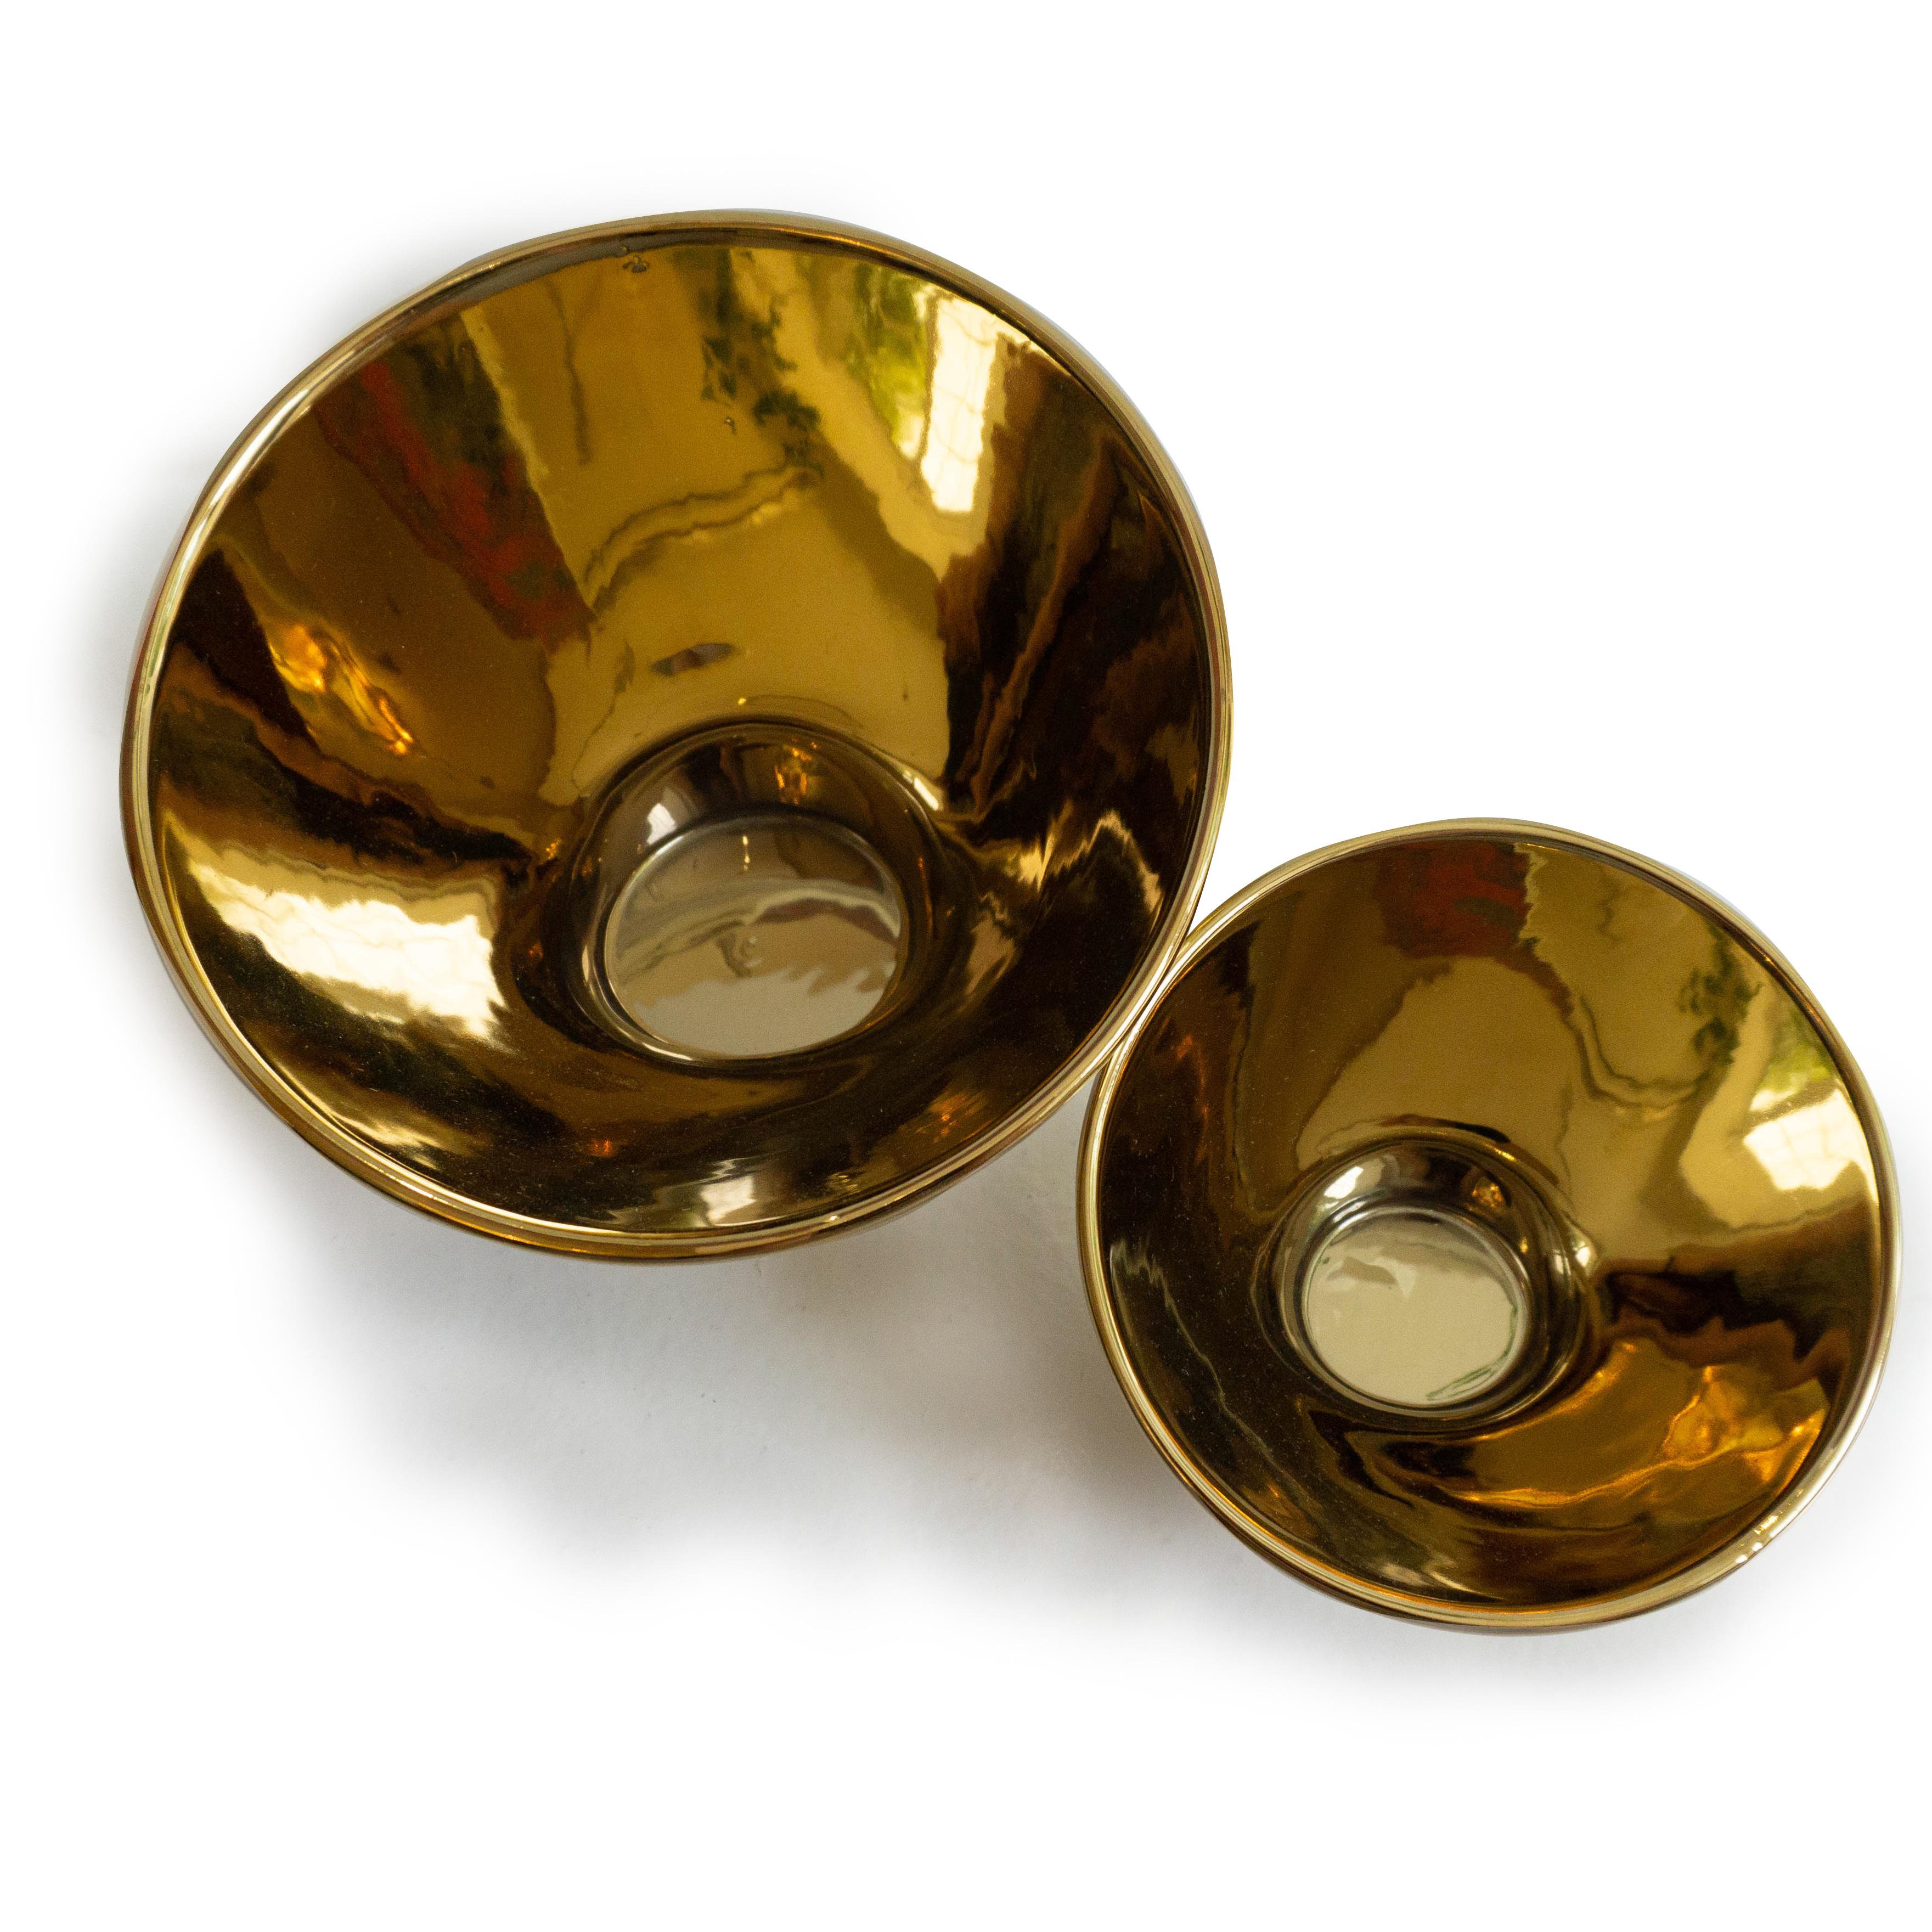 A set of gold tea light holders. These votives glow with a magnificent reflective effect in dark settings. 

Designed by Jacob de Baan

Dimensions: Large - 5” height x 7” diameter small - 3” height x 4” diameter.

 